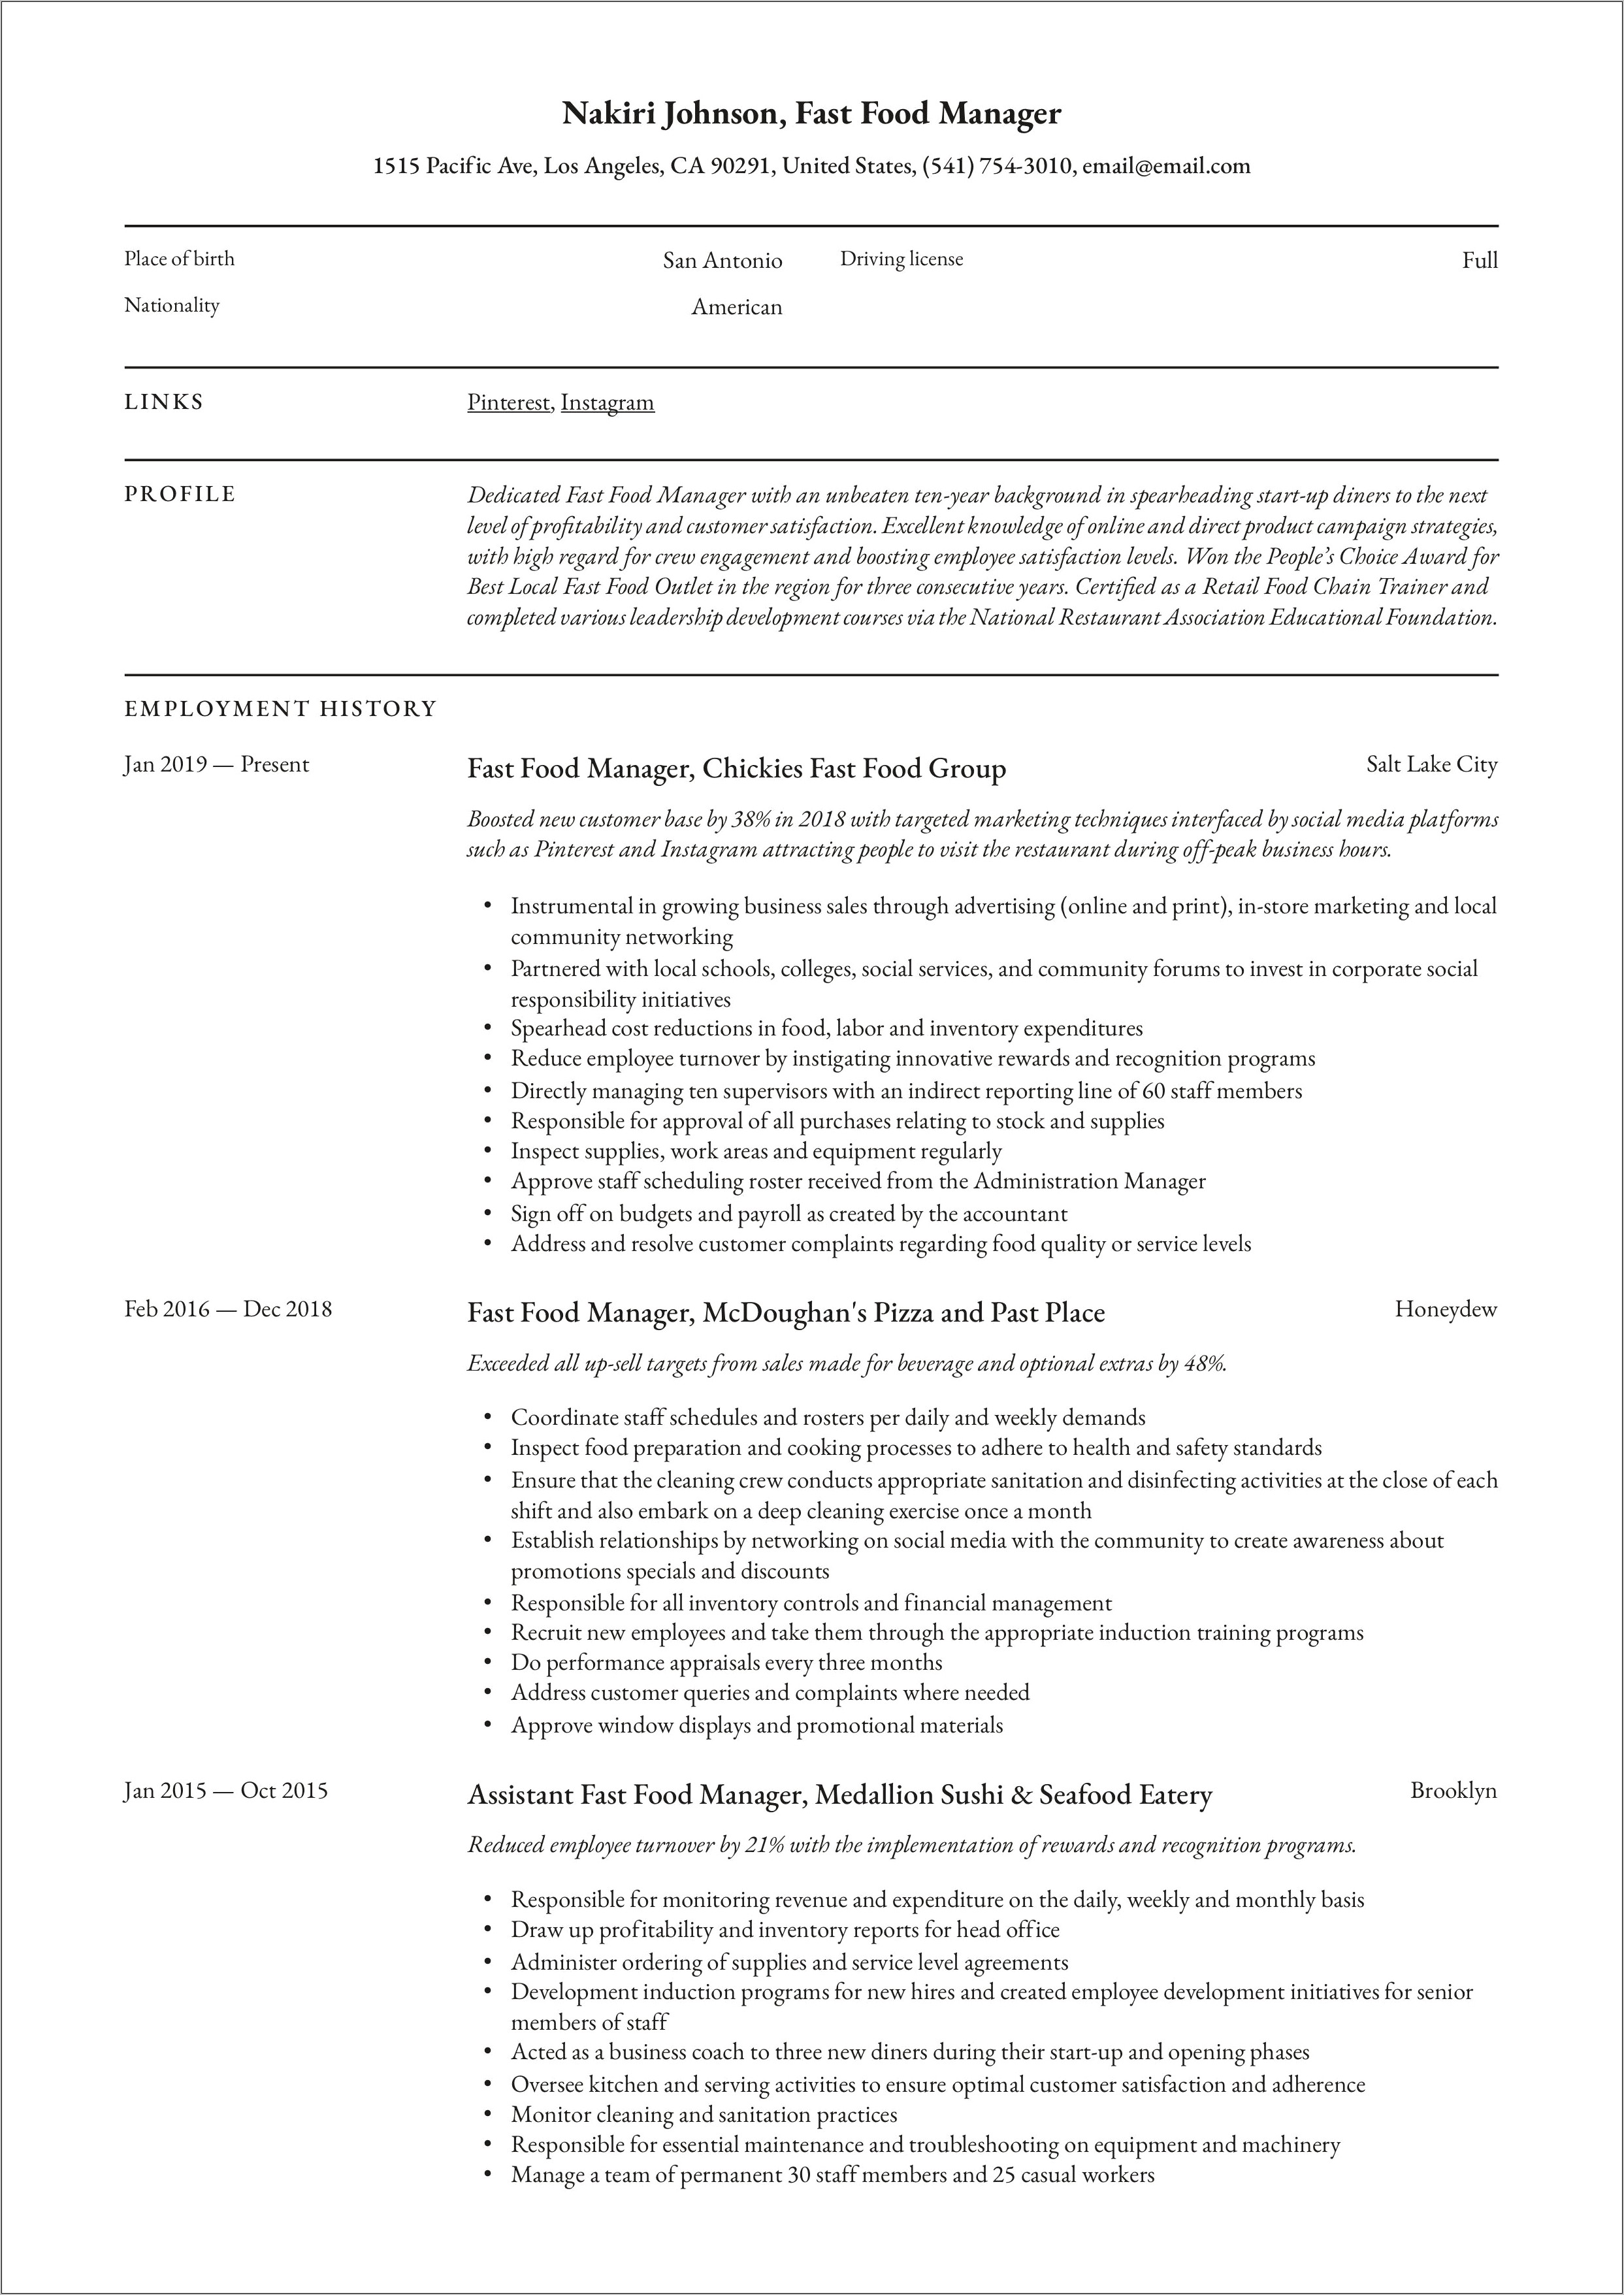 Airport Customer Service Manager Resume